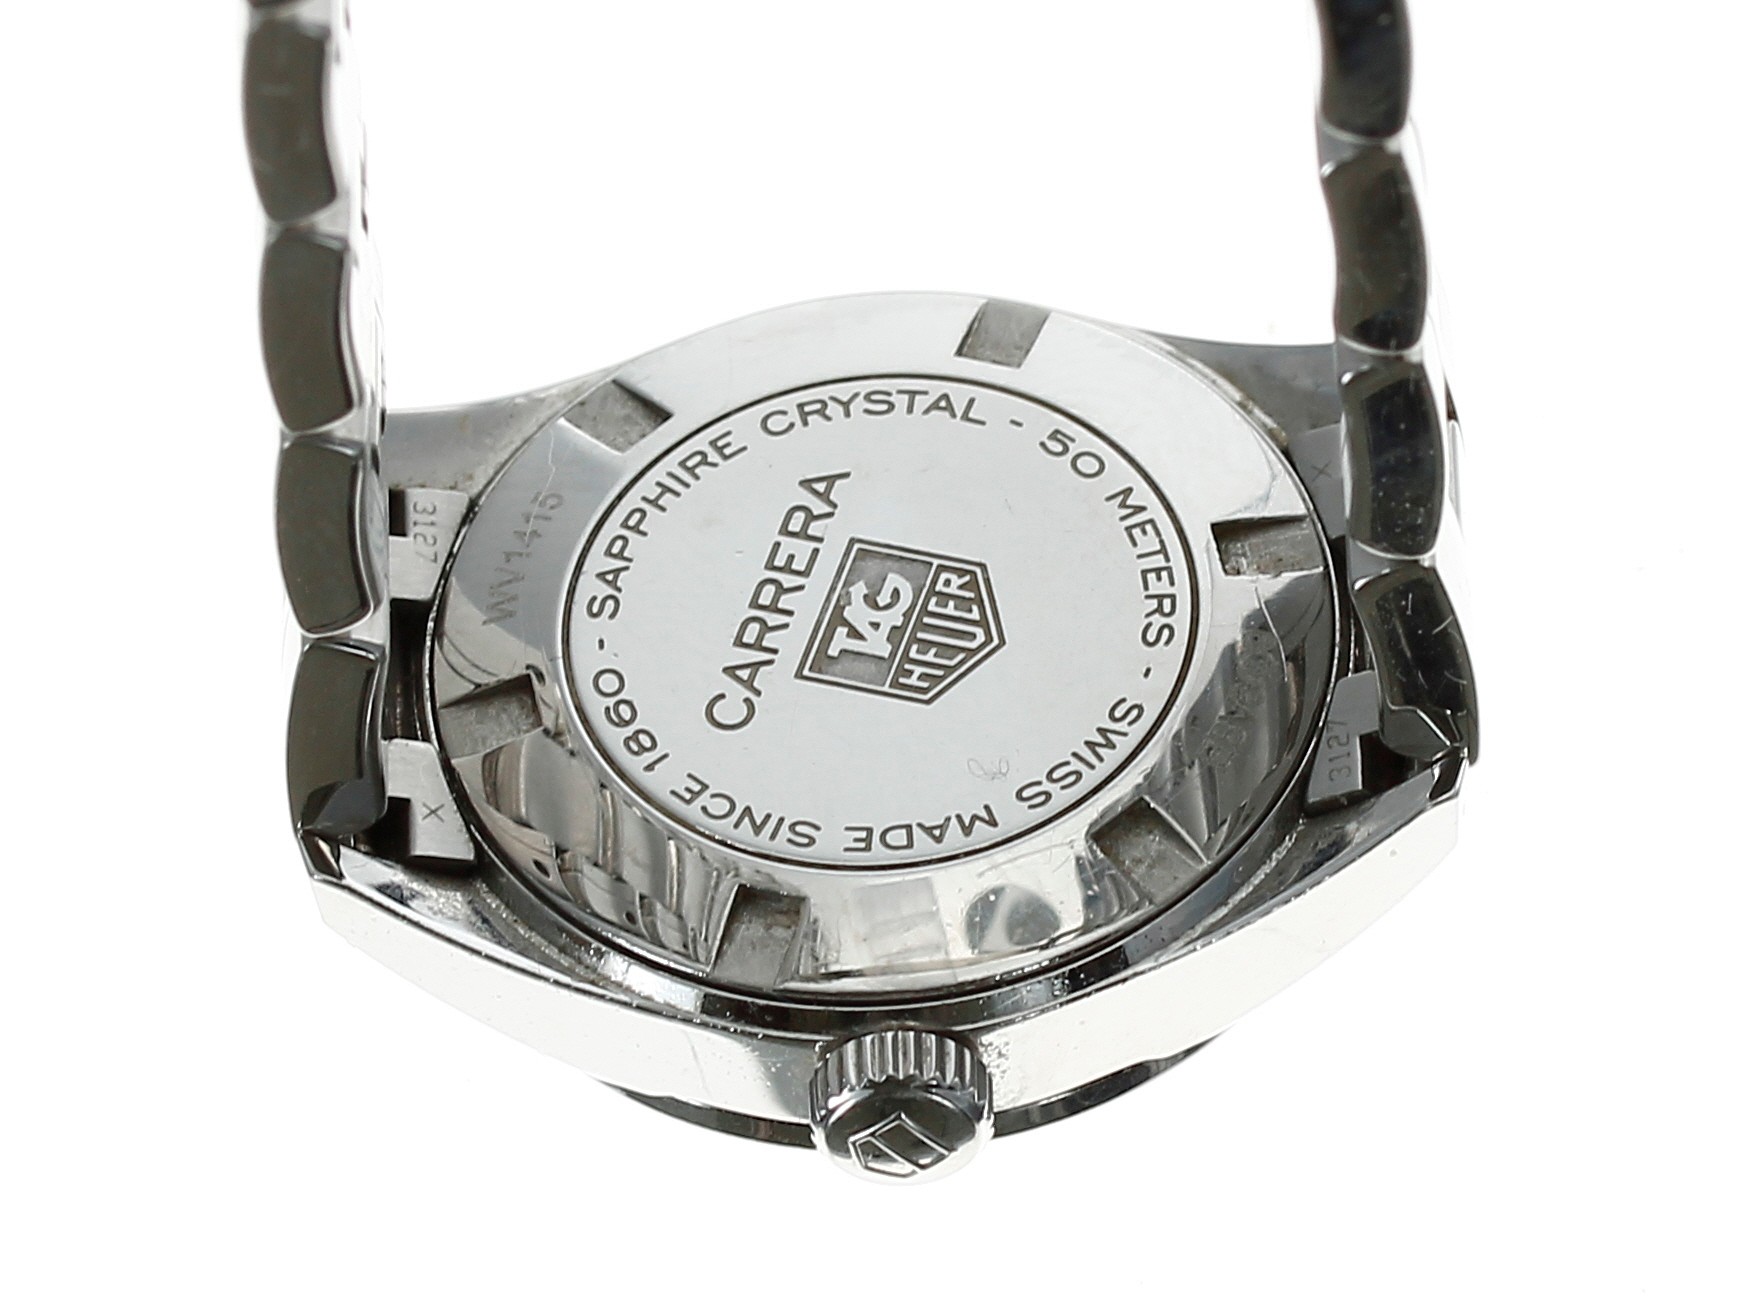 Tag Heuer Carrera lady's stainless steel wristwatch, reference no. WV1415, serial no. EBV8xxx, circa - Image 3 of 3